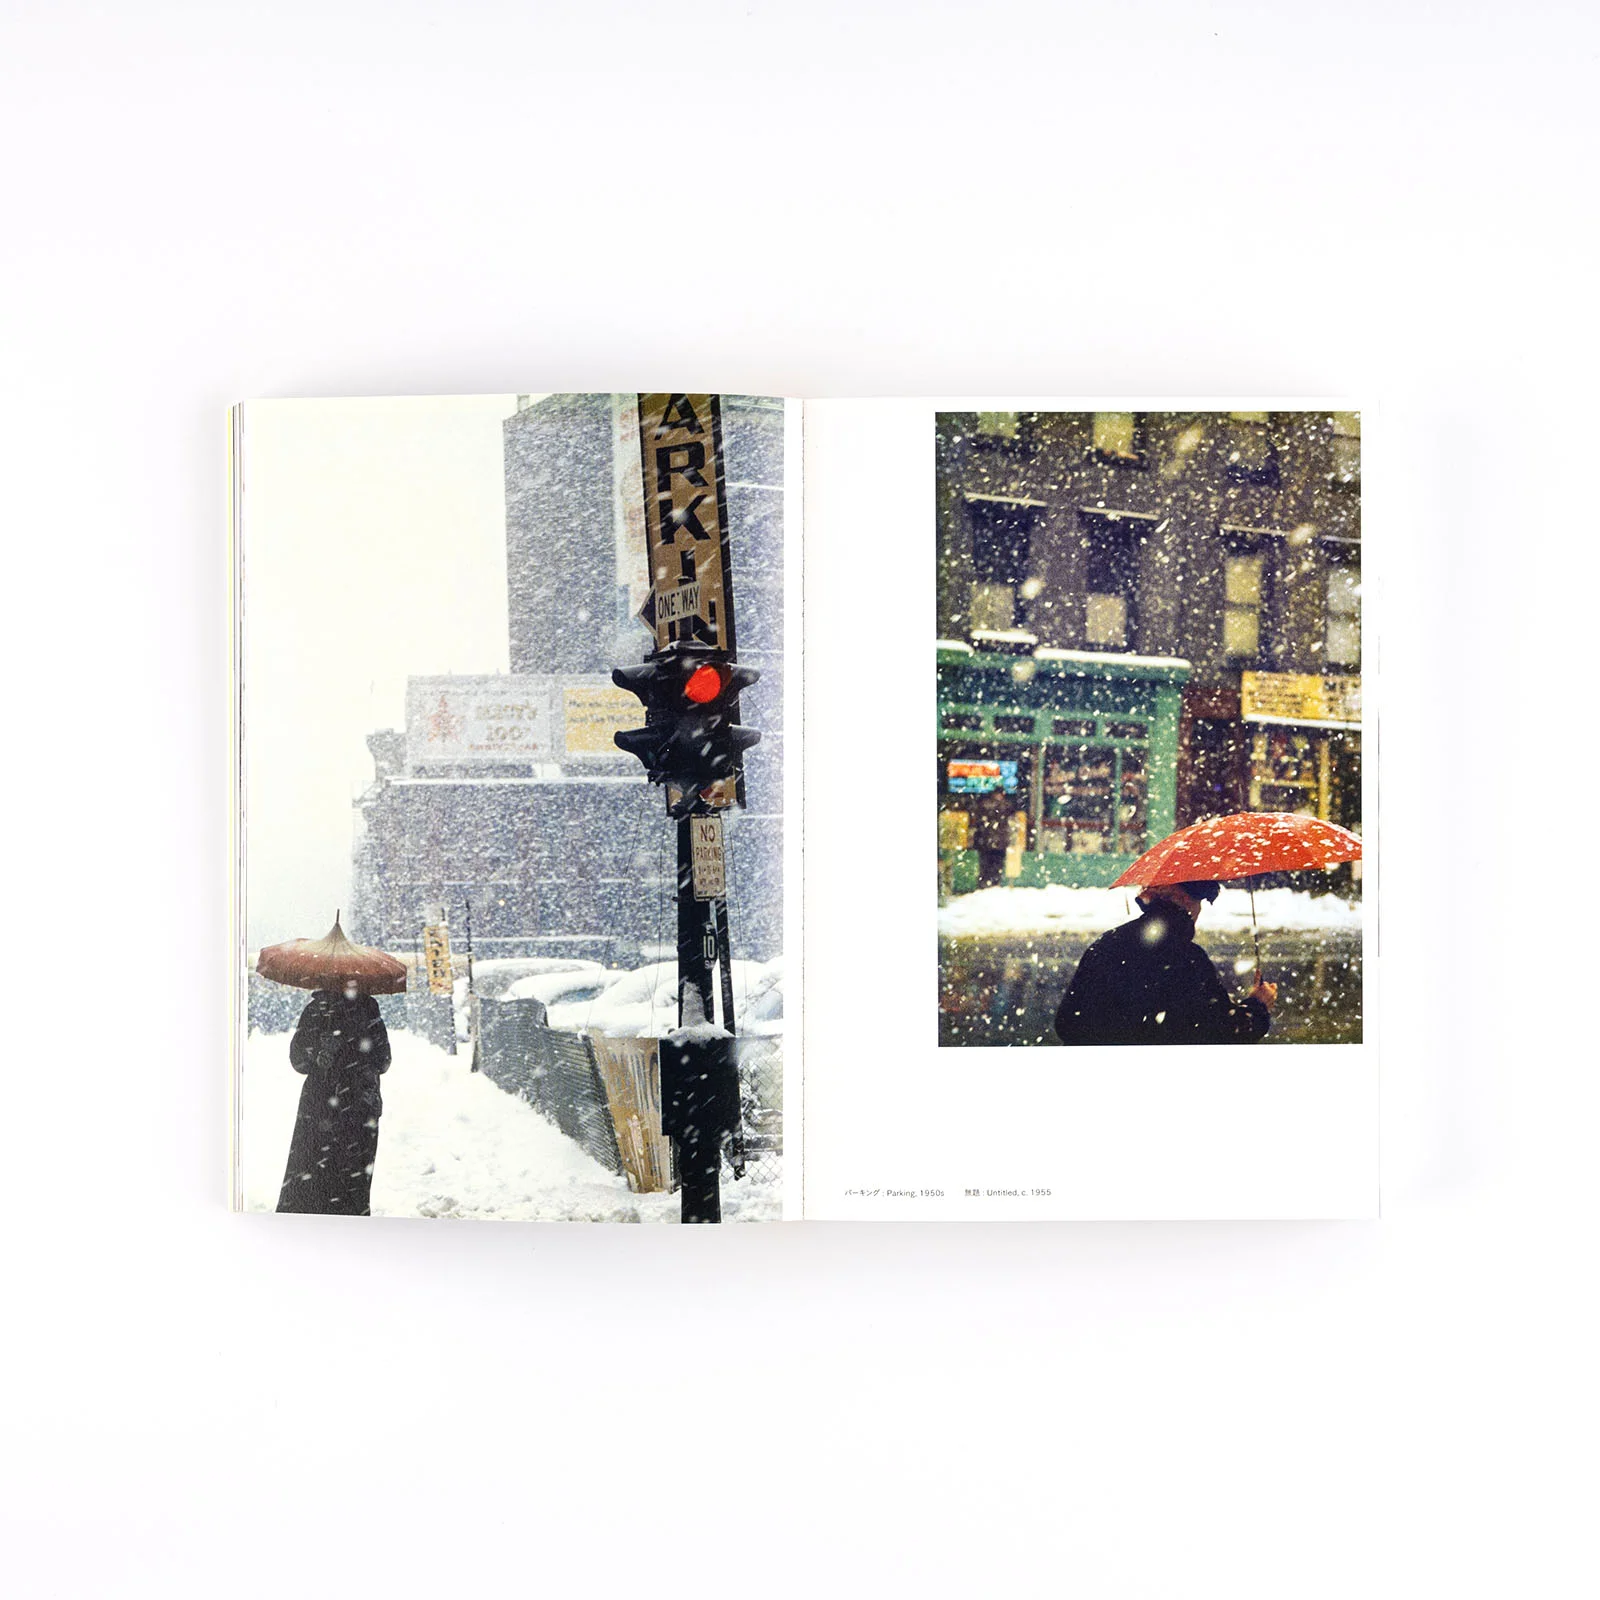 Saul Leiter: All About Saul Leiter / Forever Saul Leiter